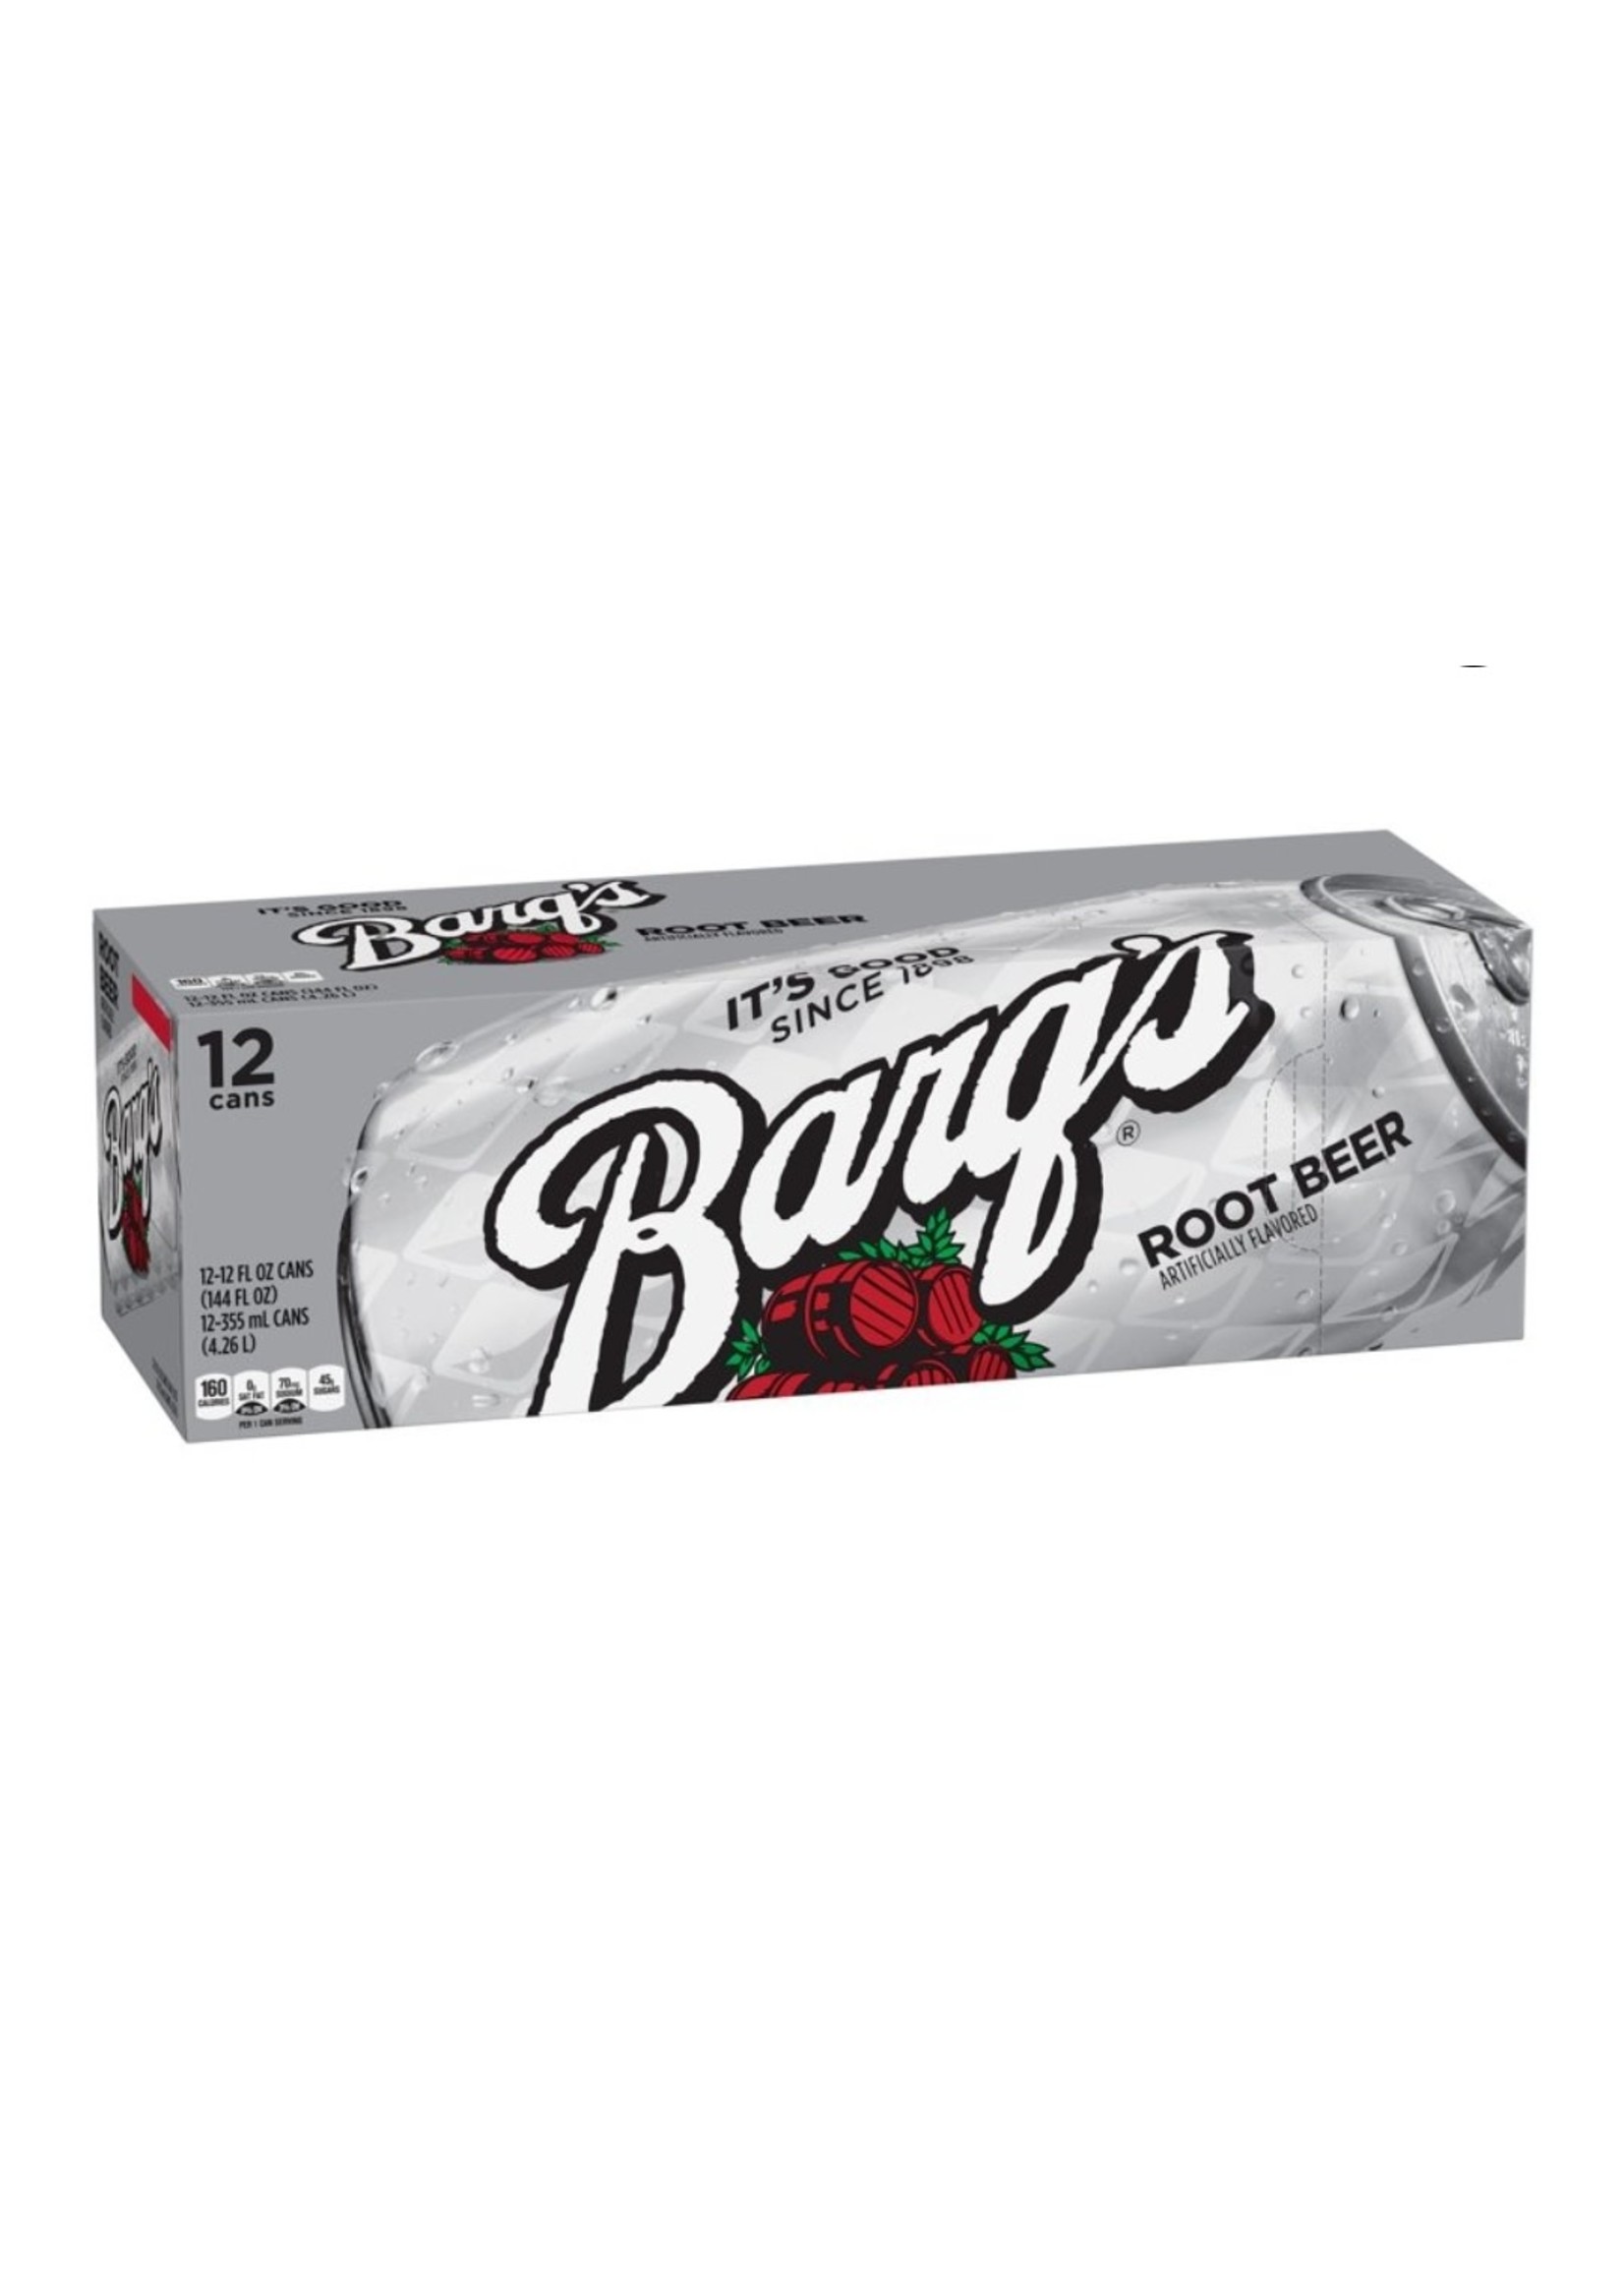 Barq's Rootbeer 116149 - Barq's Root Beer Fridge Pack Cans, 12 fl oz, 12 Pack, 2 Sets